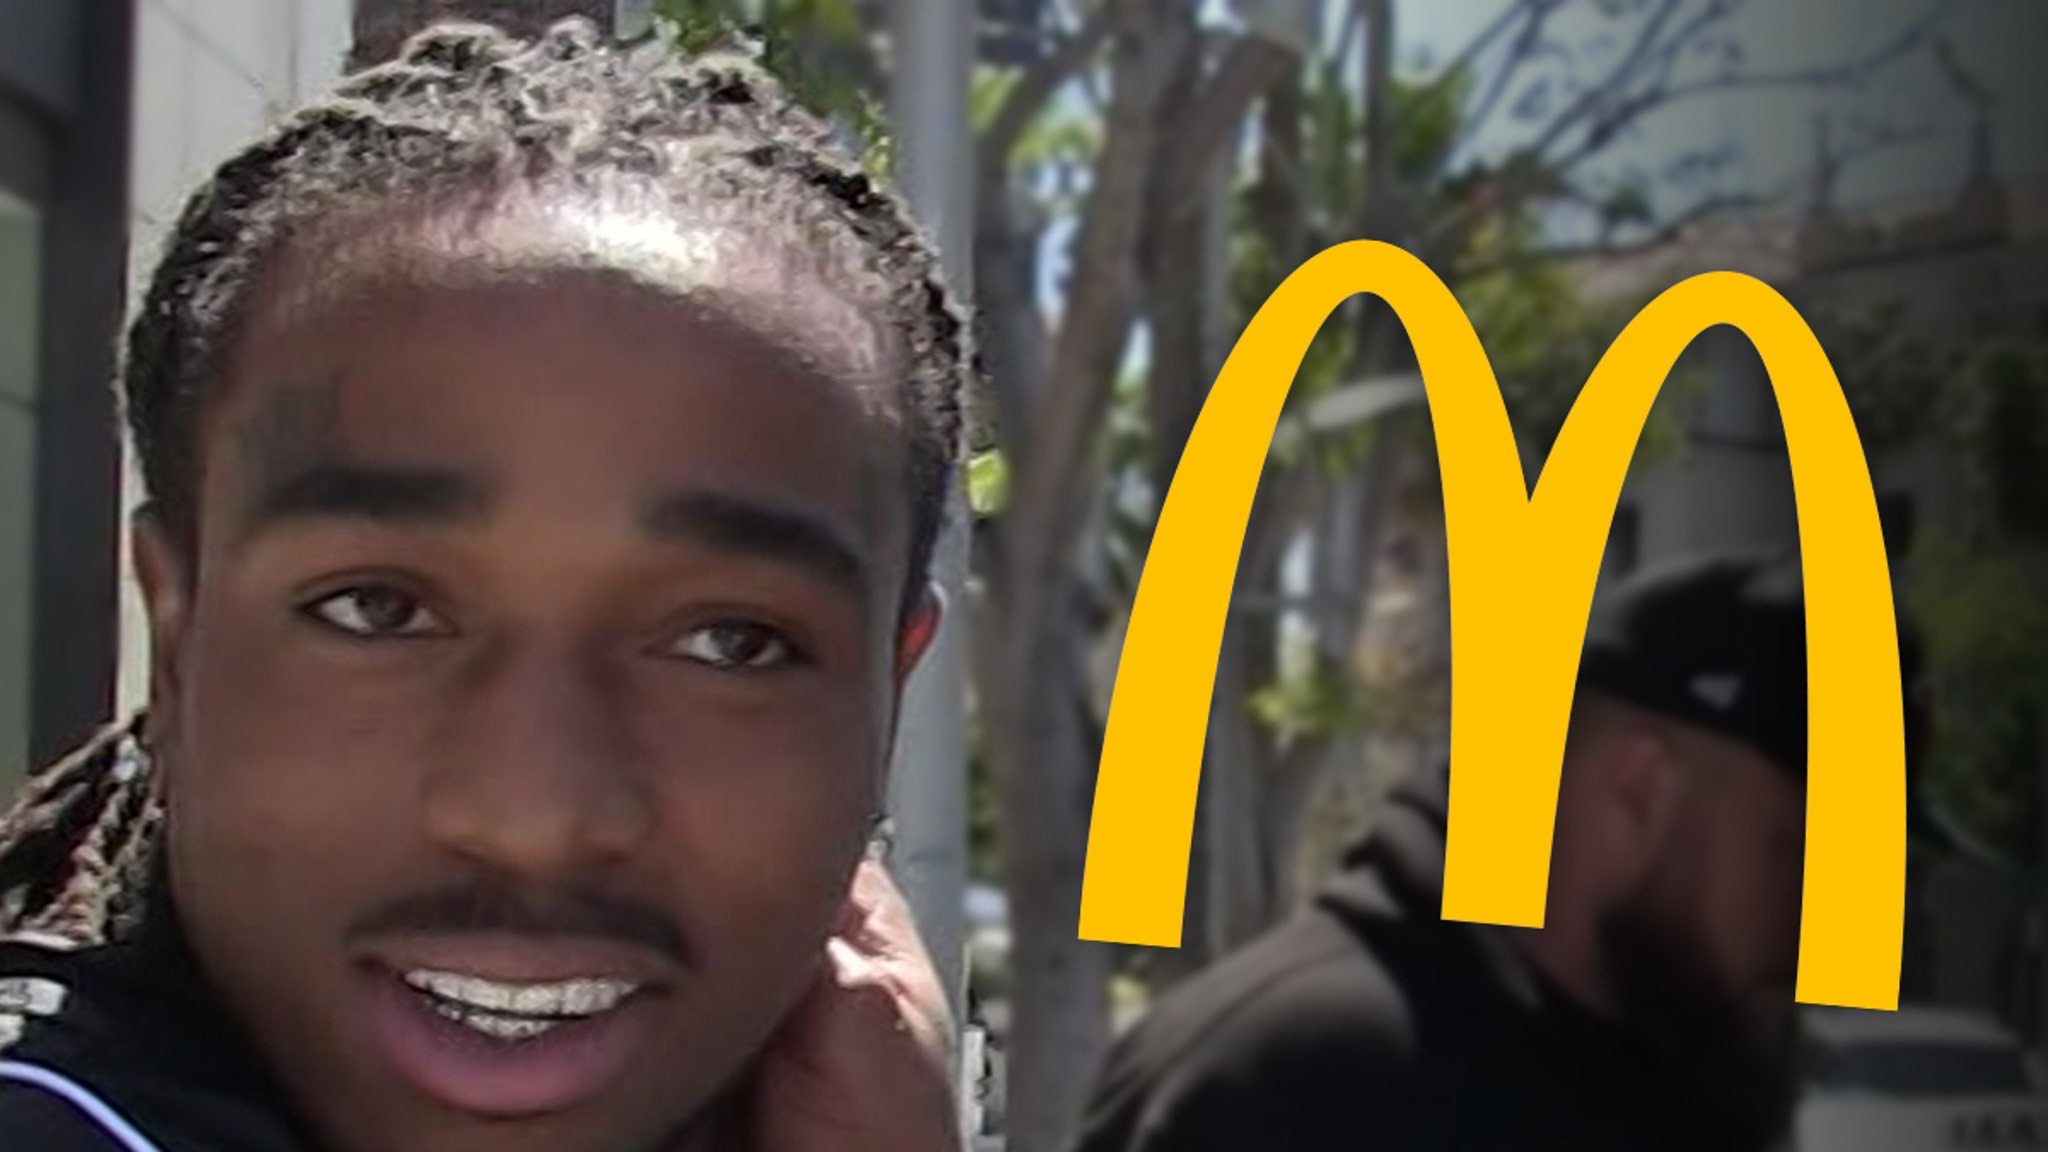 Quavo Appears to Pitch McDonald's on His Own 'Meal' Deal Sponsorship - TMZ